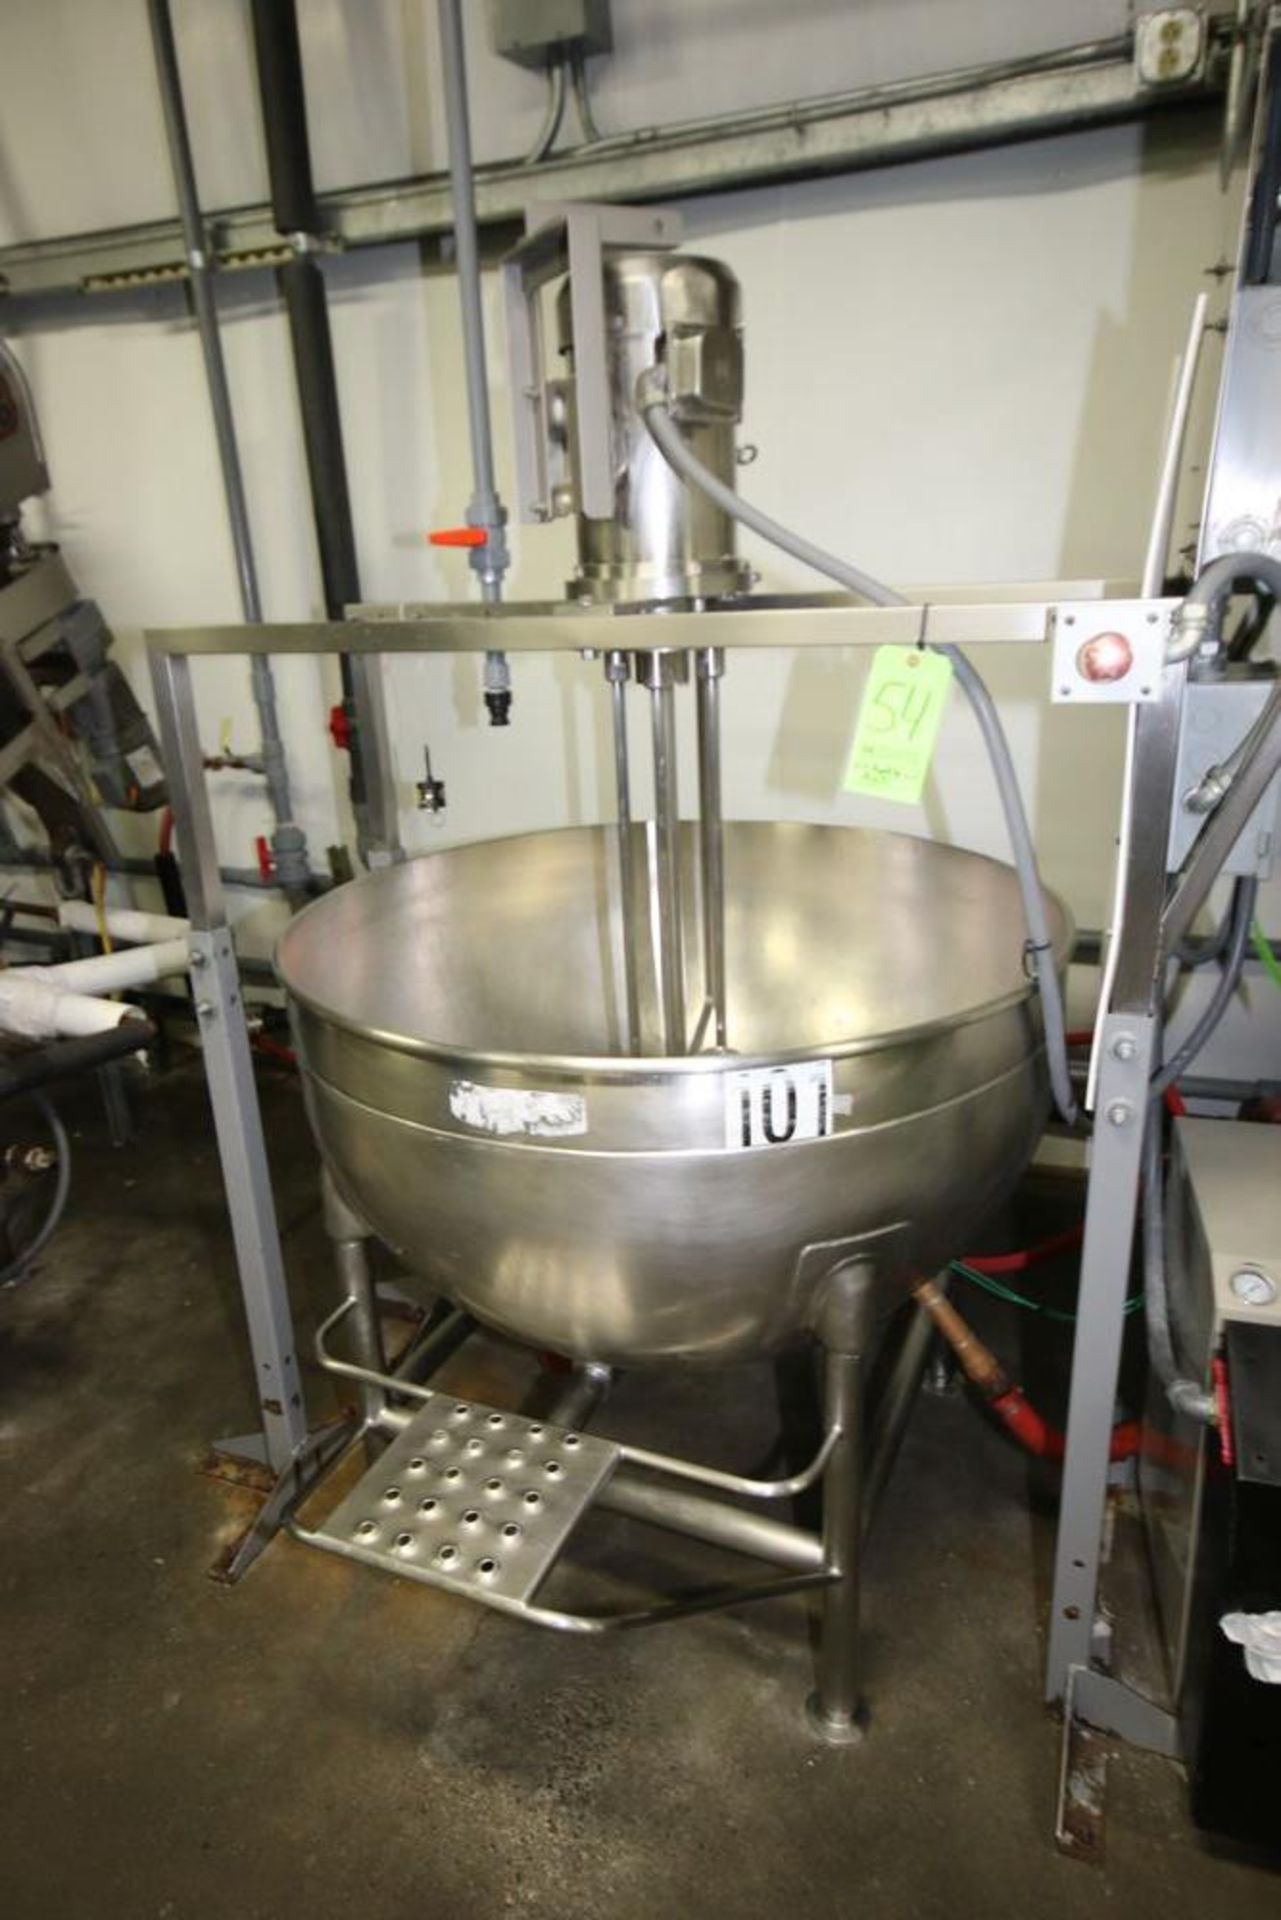 Aprox. 120 Gal. S/S Kettle, M/N LS-100, S/N 920263, MDMT 32 F @ 25 PSI, MAWP 25 PSI @ 267 F, with - Image 2 of 10